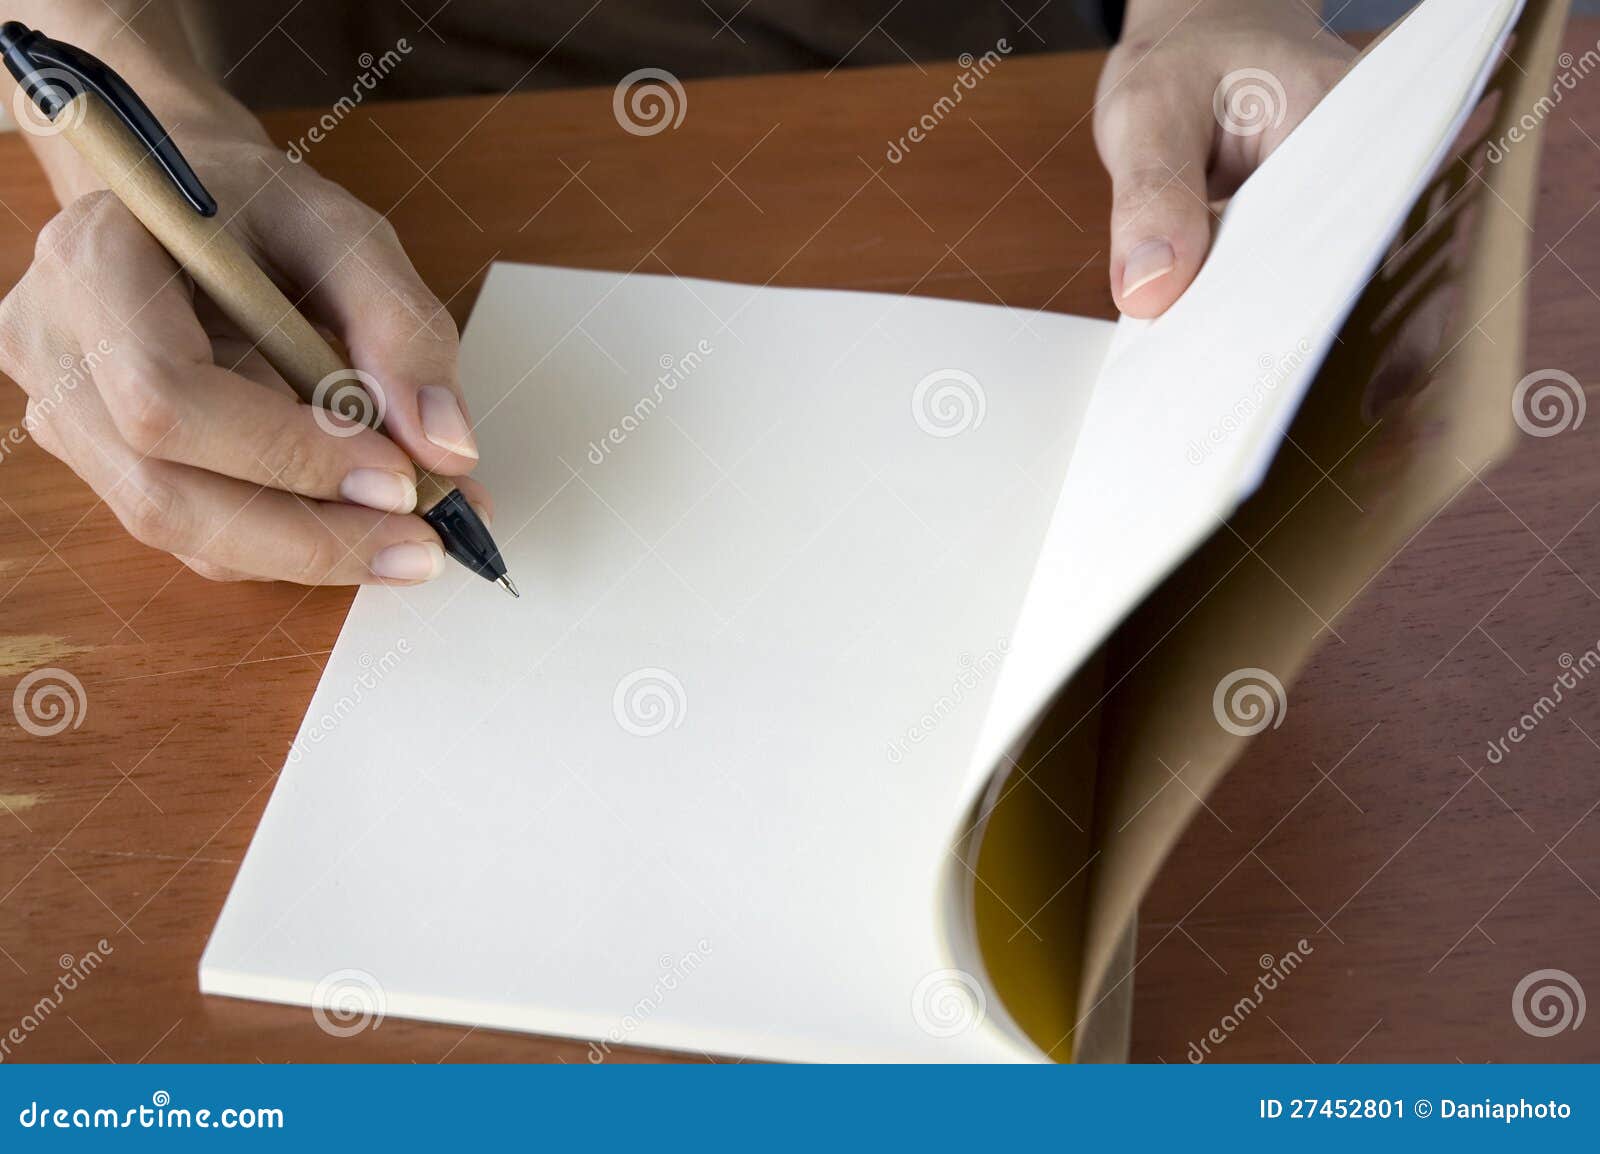 Writing on notebook stock image. Image of busy, document - 27452801